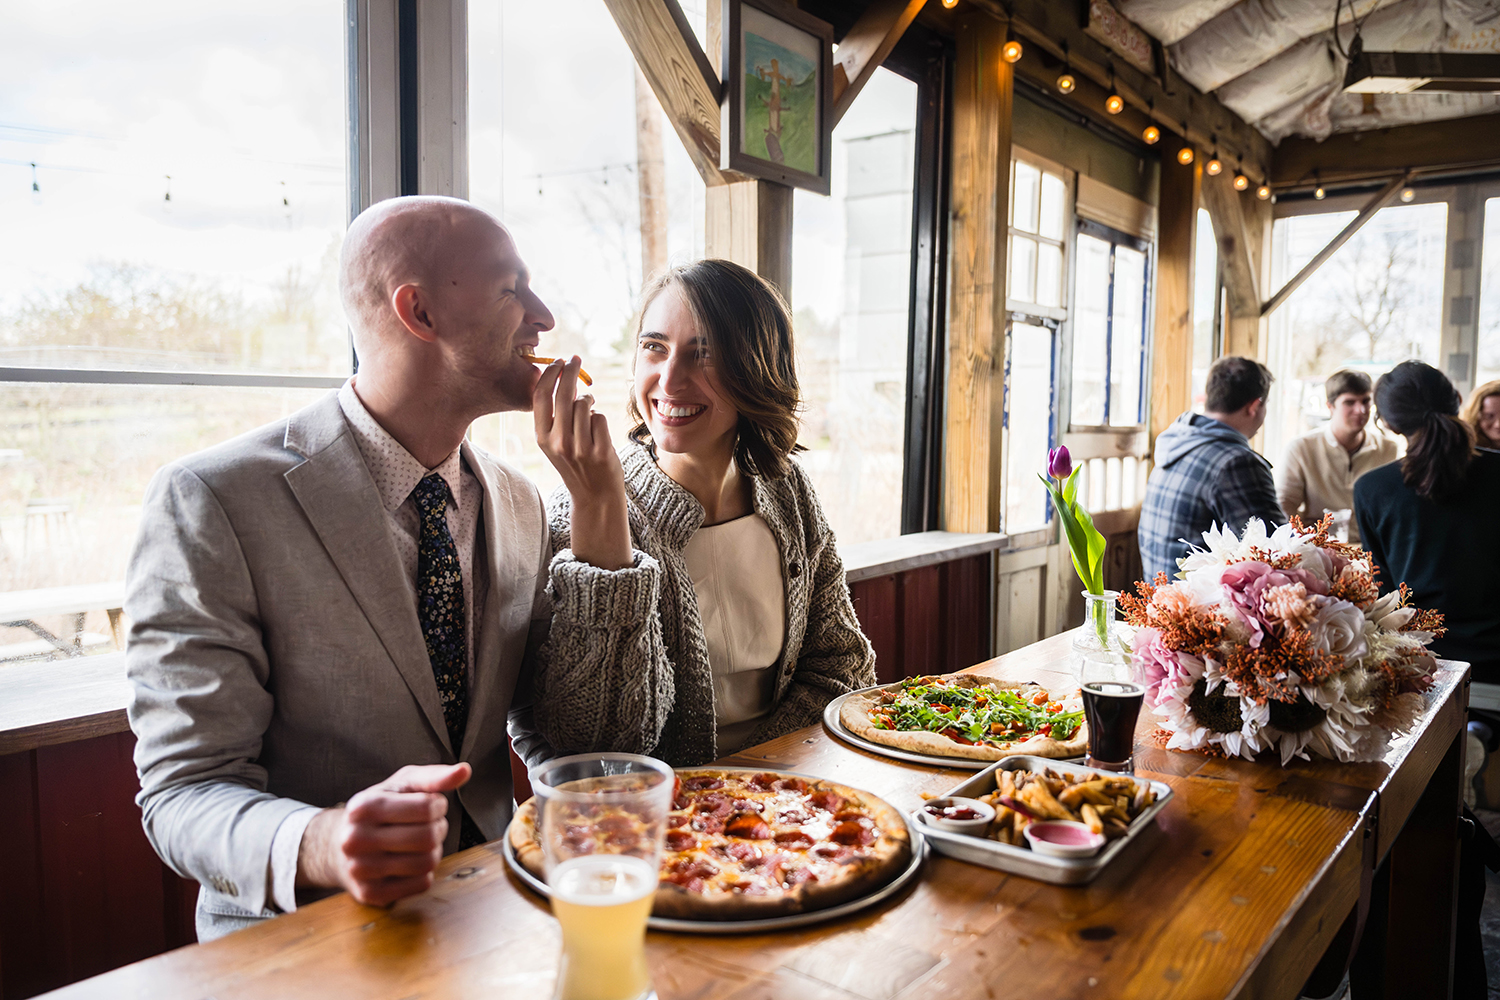 A marrier feeds her significant other a fry at Rising Silo Brewery during their dinner following their elopement ceremony.